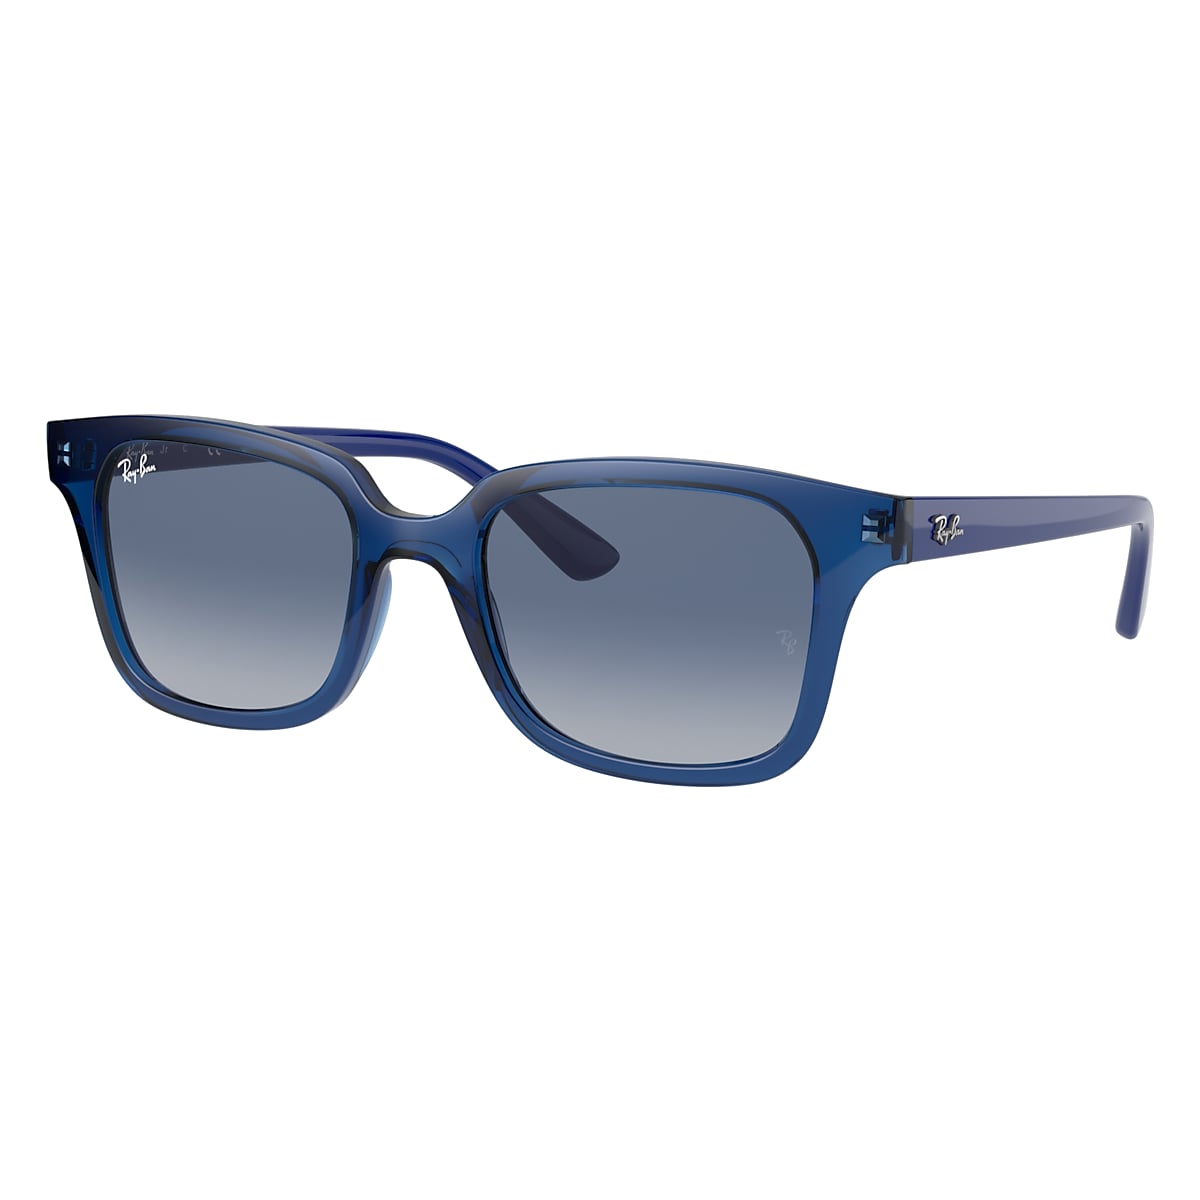 RB9071S KIDS Sunglasses in Transparent Blue and Blue - RB9071S 